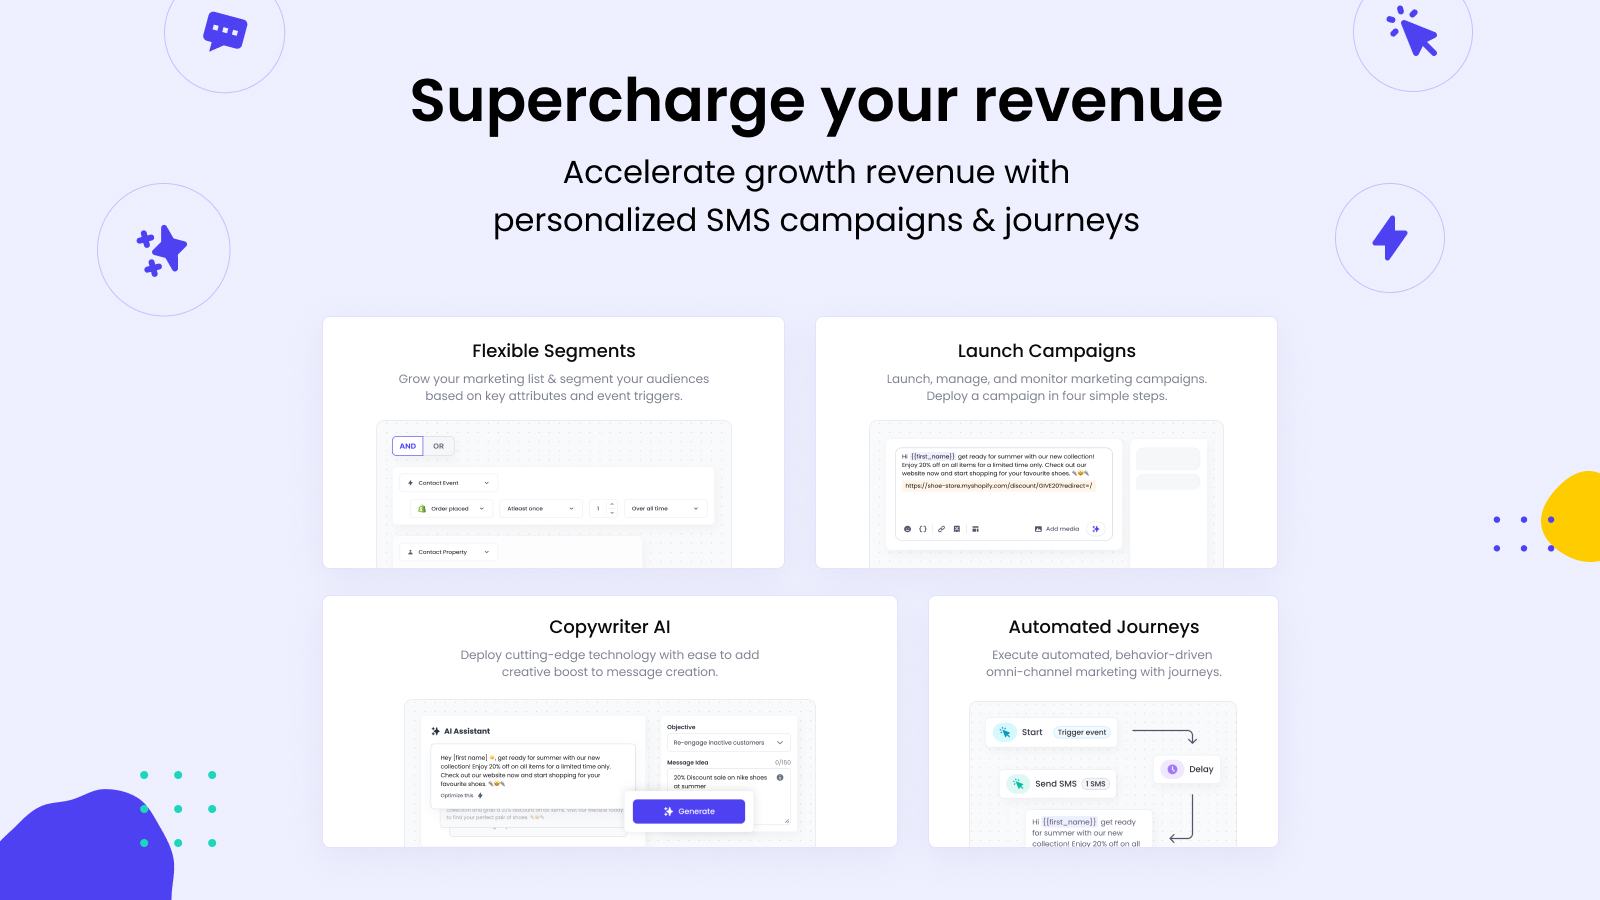 Supercharge revenue with personalized SMS Campaigns & Journeys